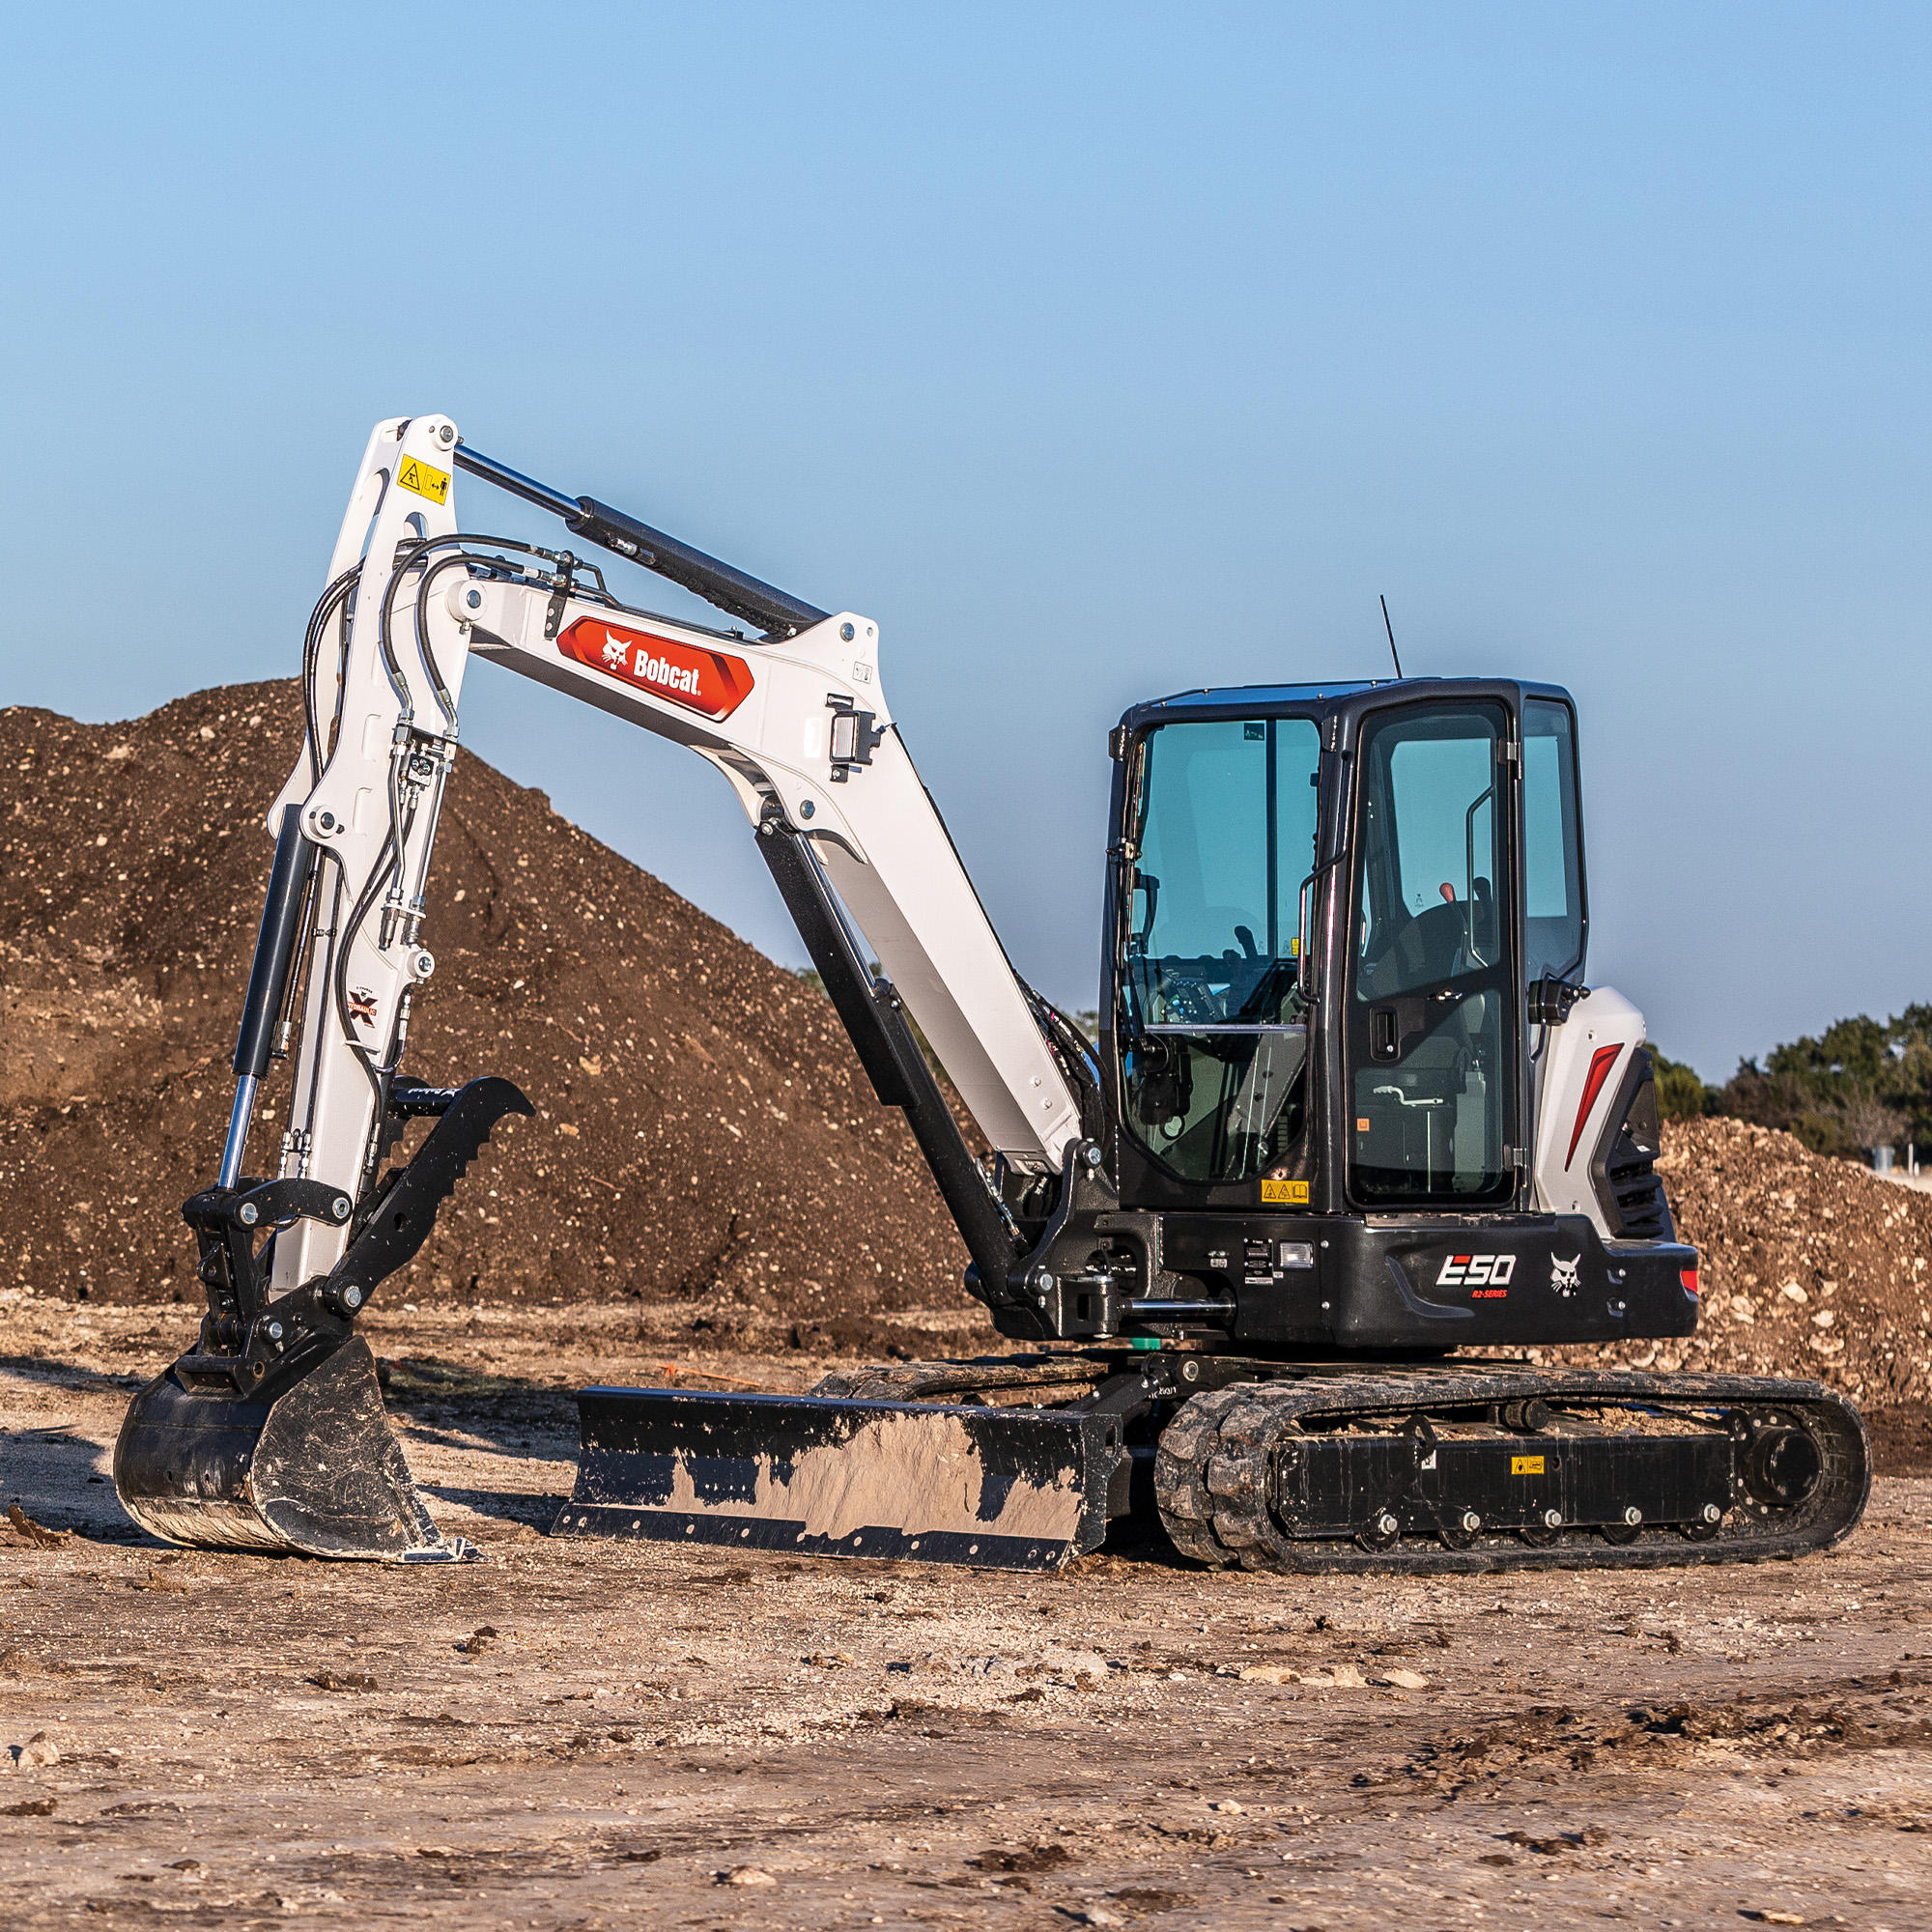 Bobcat E50 compact excavator Bobcat of Fort McMurray Fort Mcmurray (780)714-9200